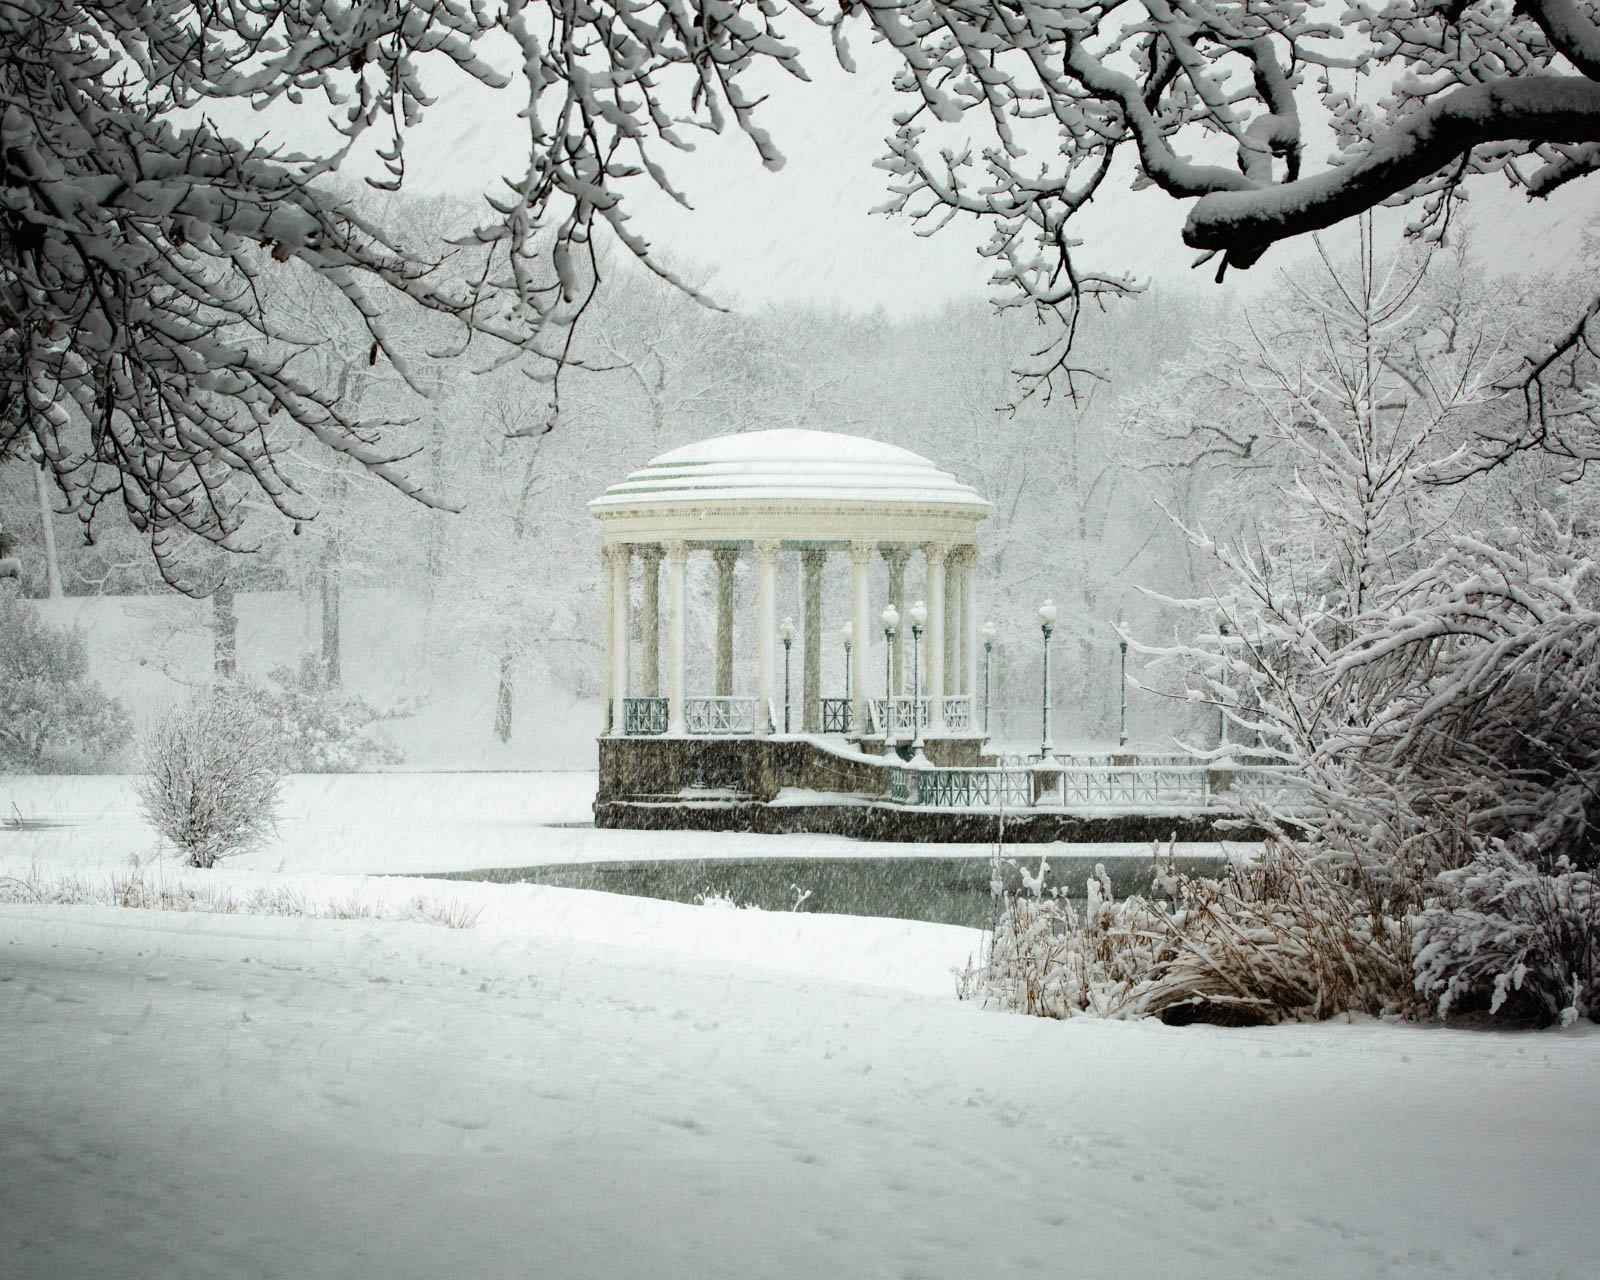 A Snowy Day at Roger Williams Park